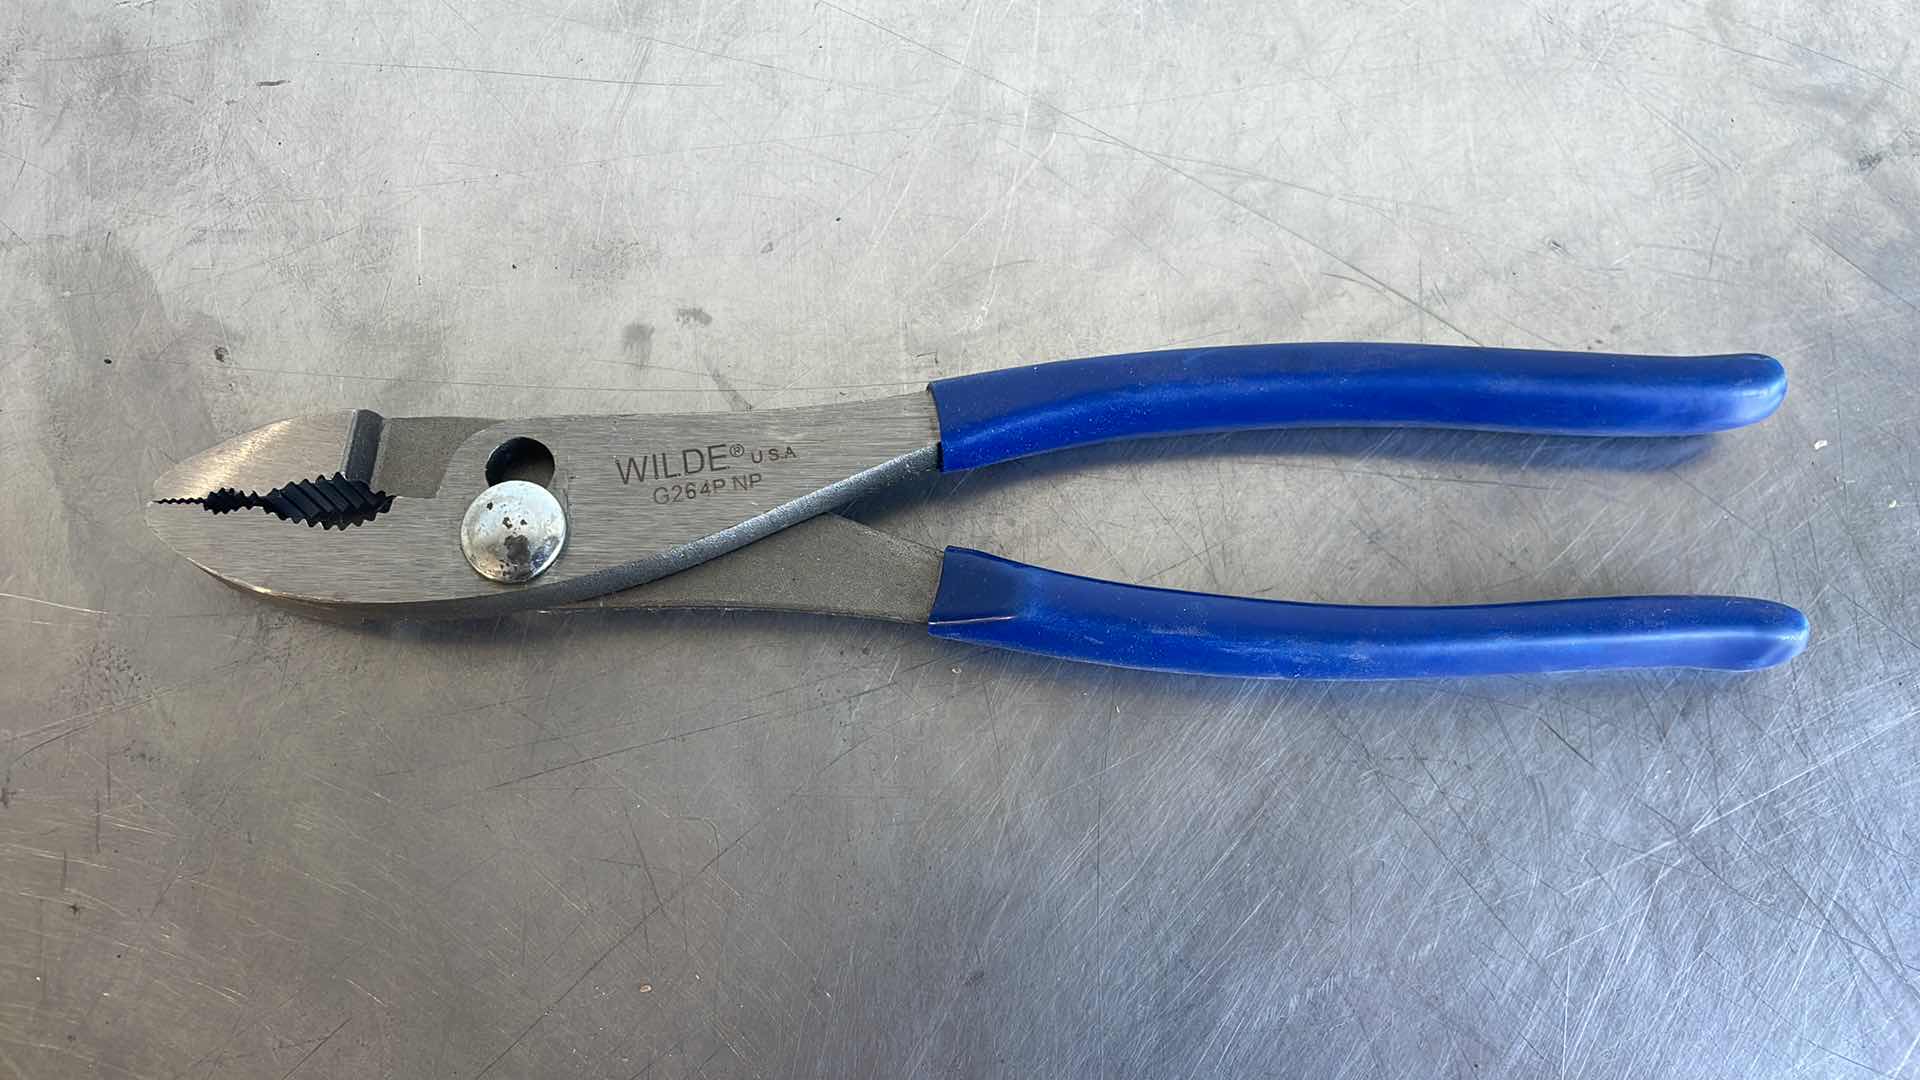 Photo 1 of WILDE G264P NP 10” SLIP JOINT PLIERS